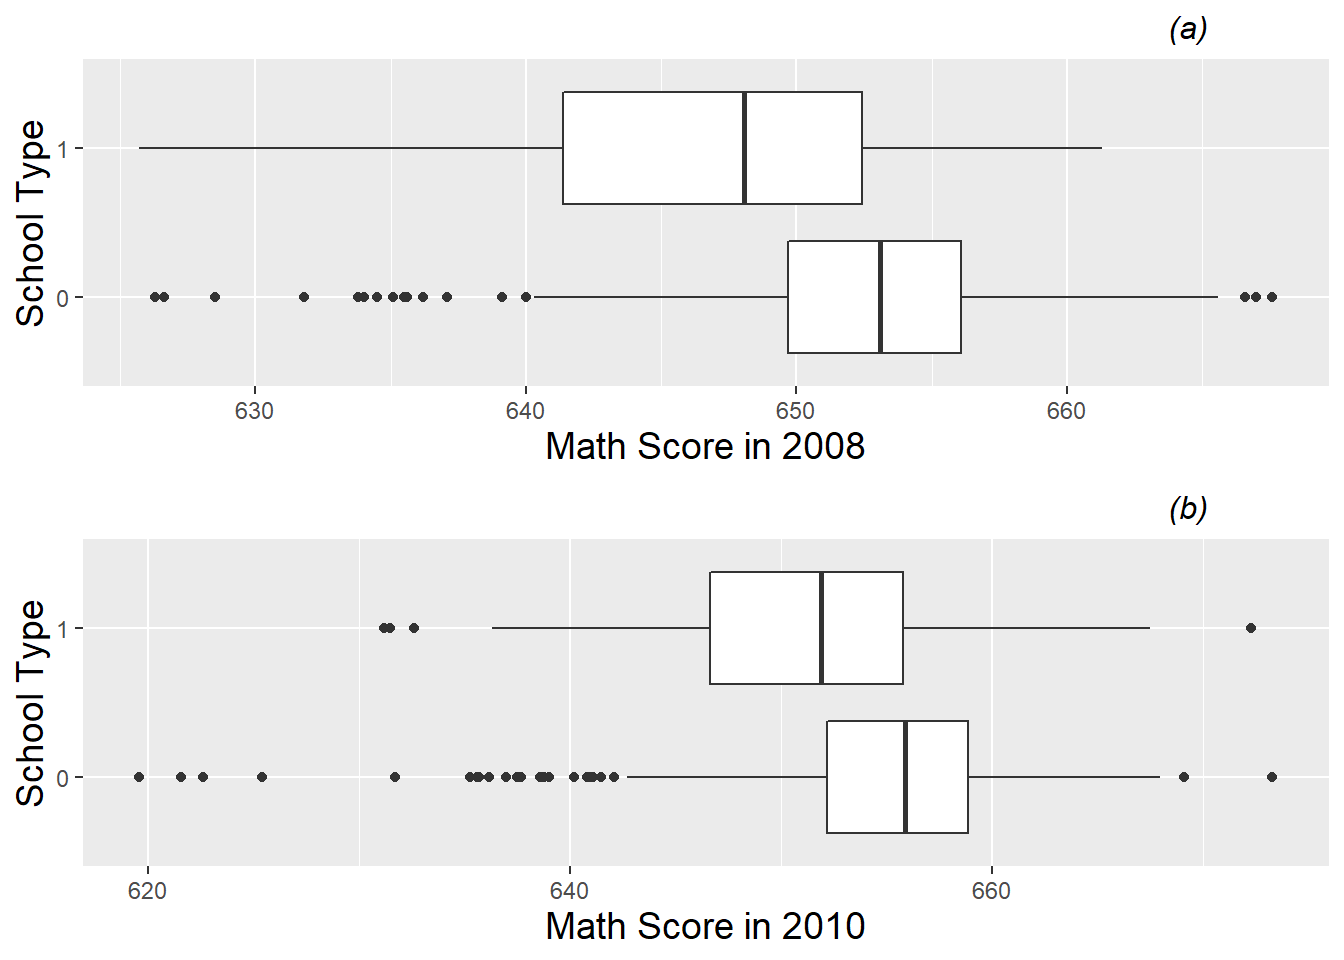 Boxplots of (a) 2008 and (b) 2010 math scores by school type (charter (1) vs. public non-charter (0)).